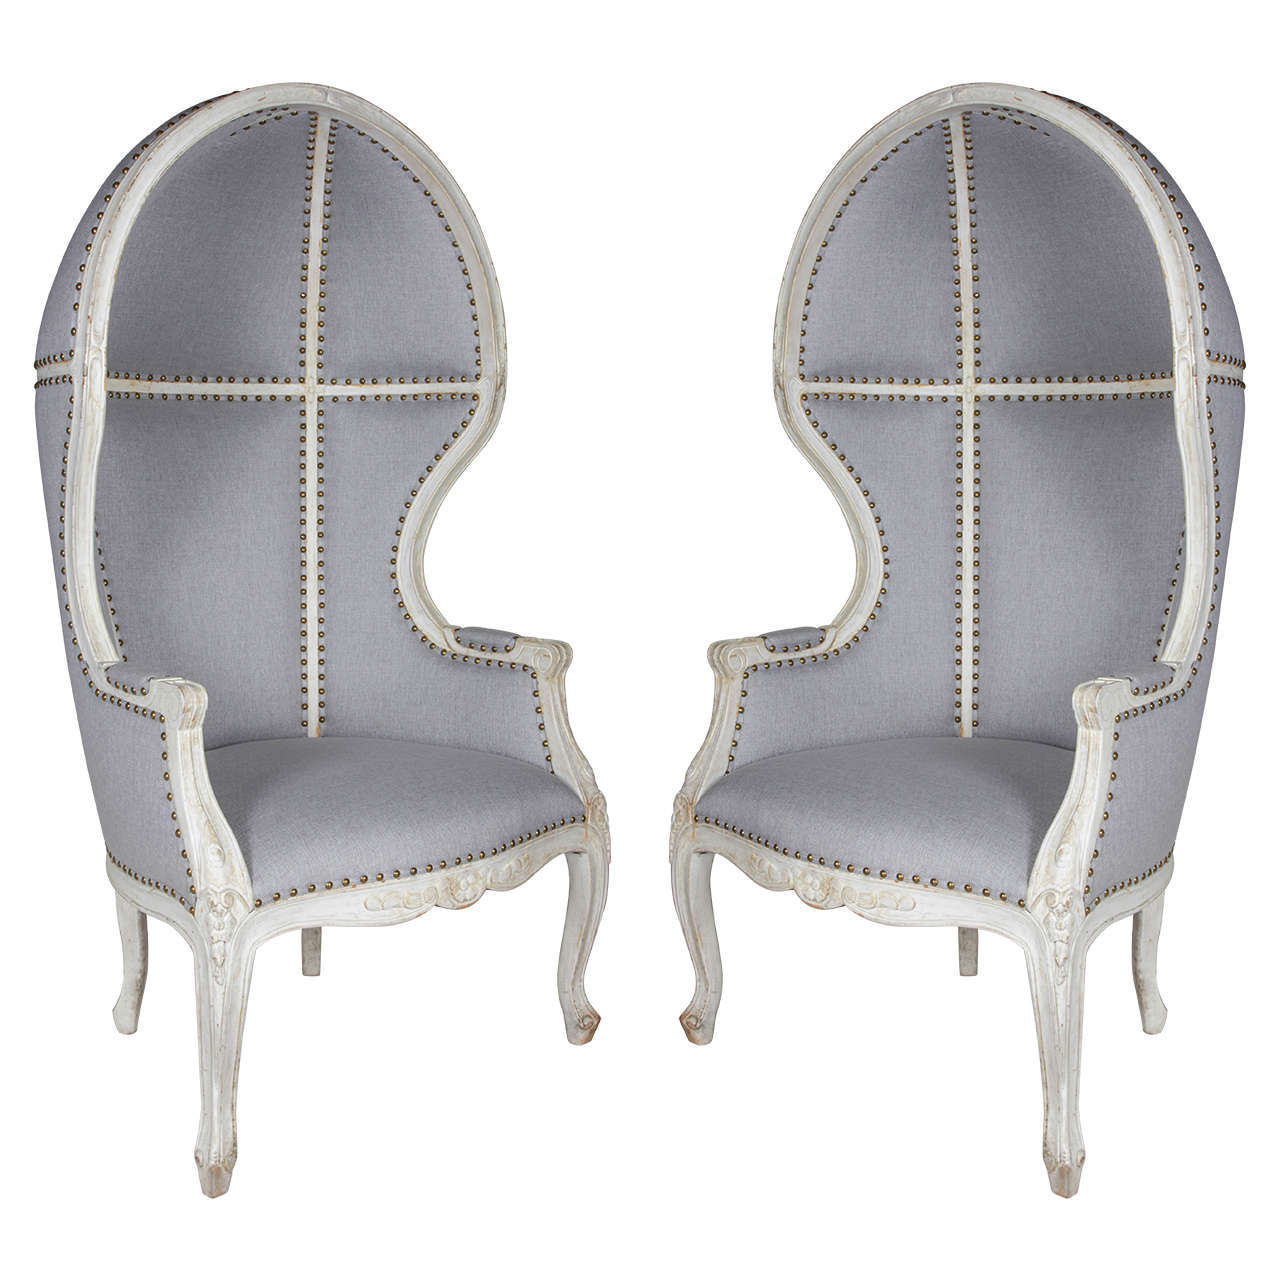 Pair of Gustavian Style Canopy Chairs with Elegant Hooded Design